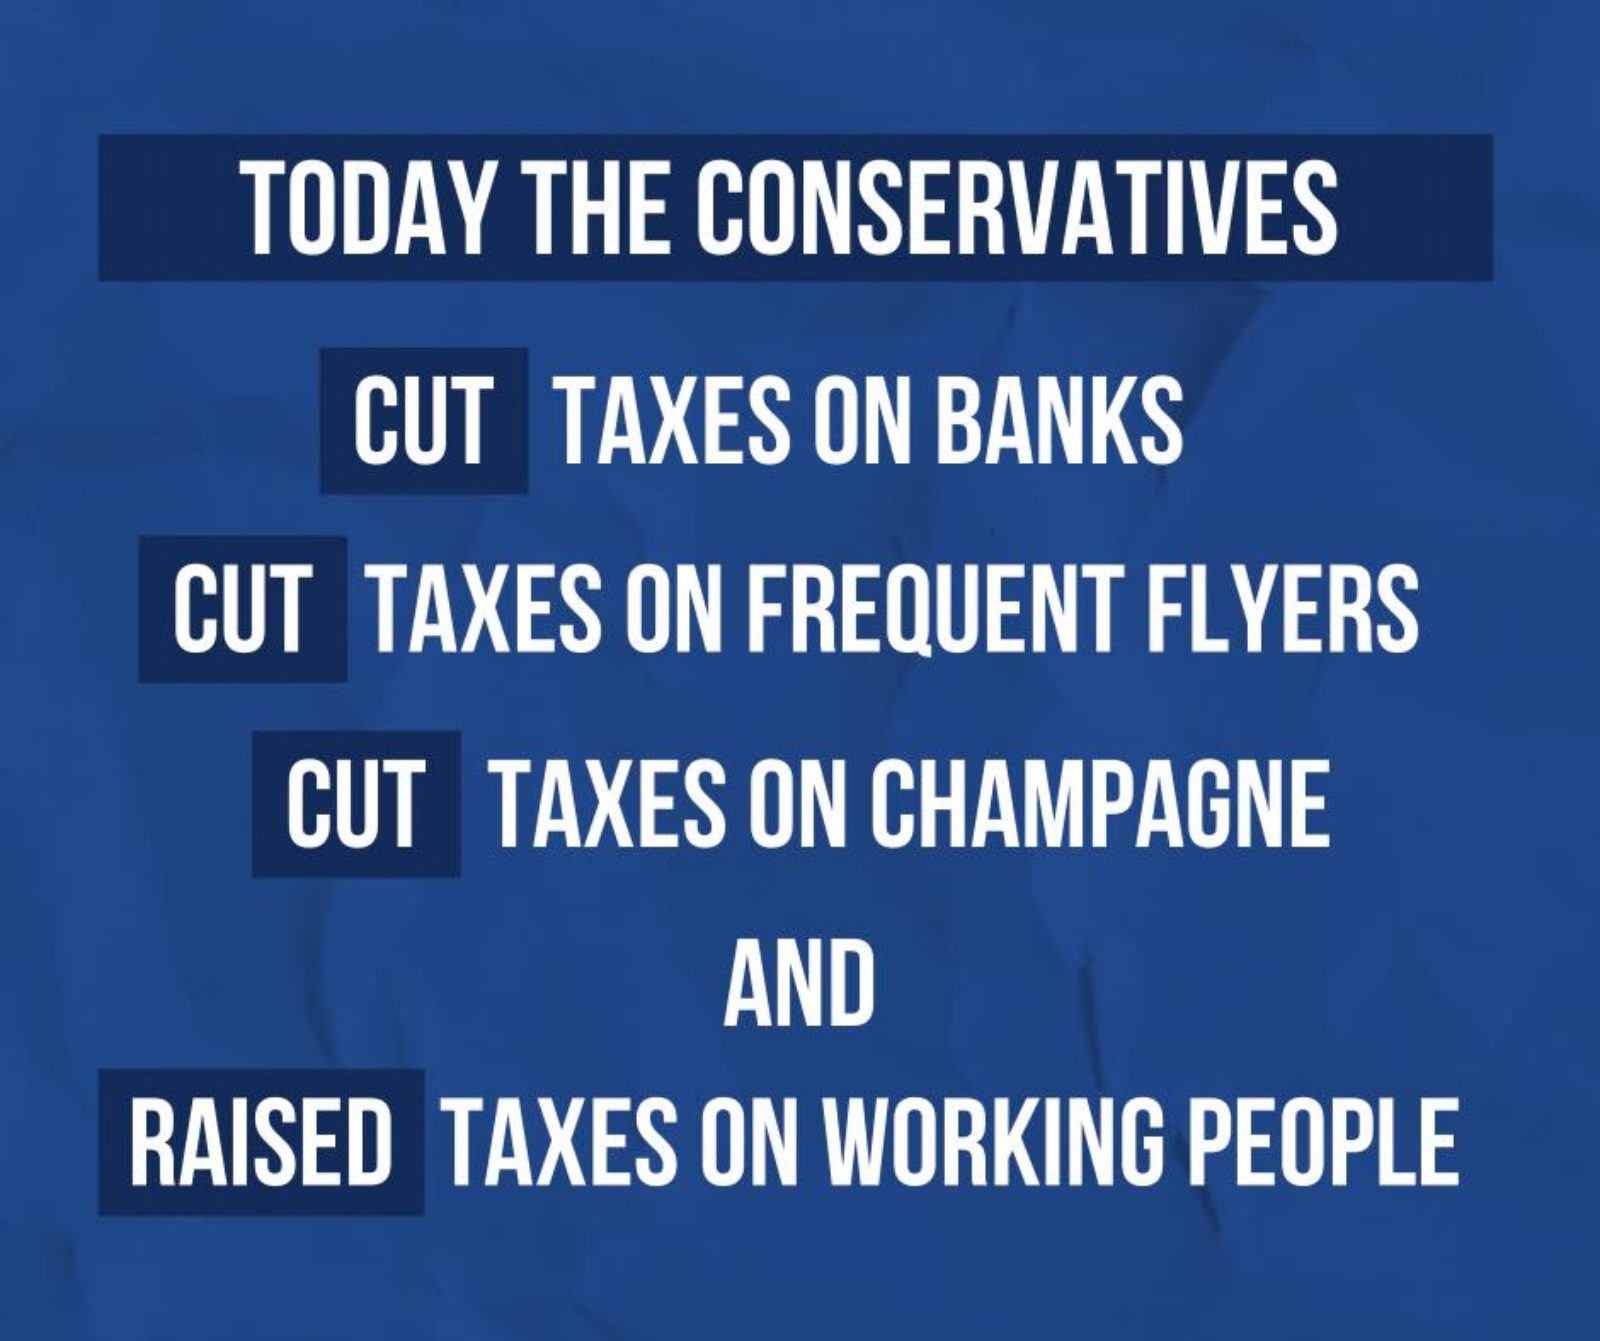 This Tory budget is out of touch